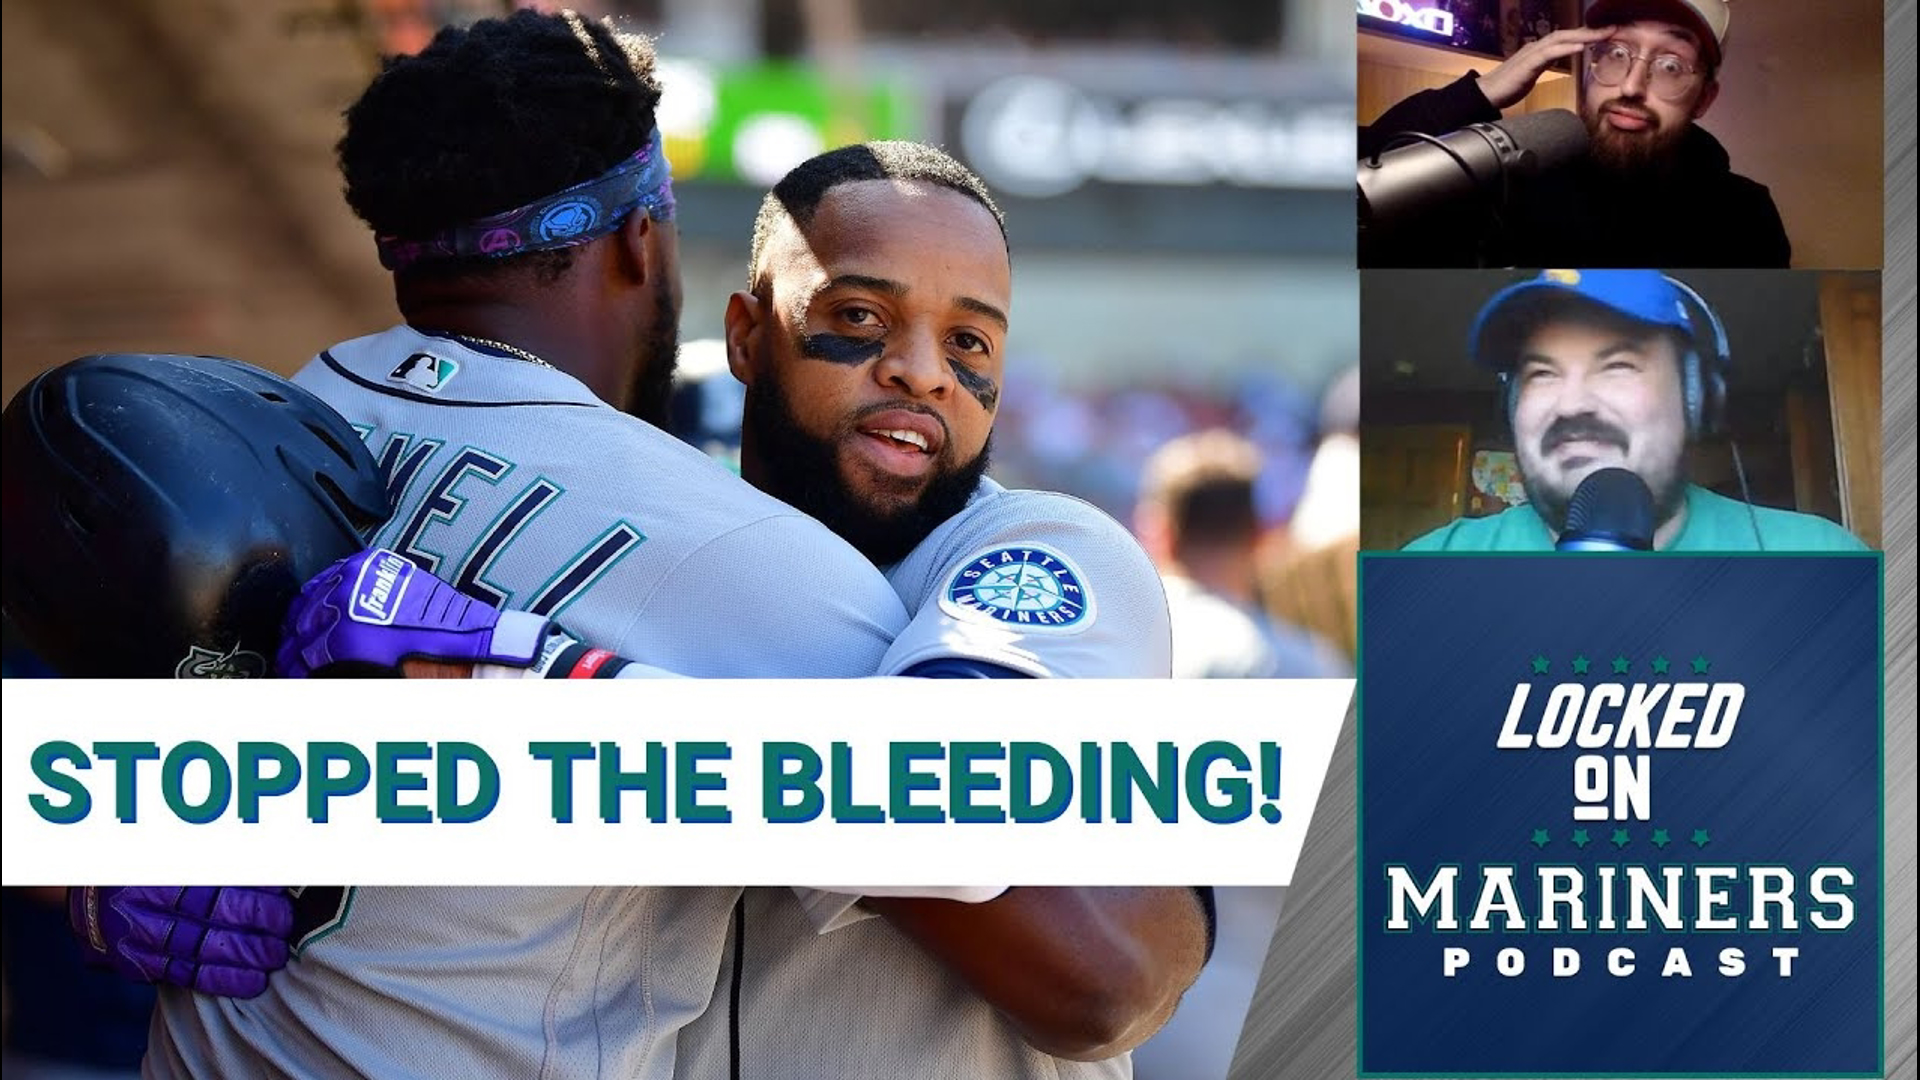 The Seattle Mariners had a rough weekend but managed to salvage the final game of a 4 game set in Anaheim. The team also knocked at least 3 games off their magic num